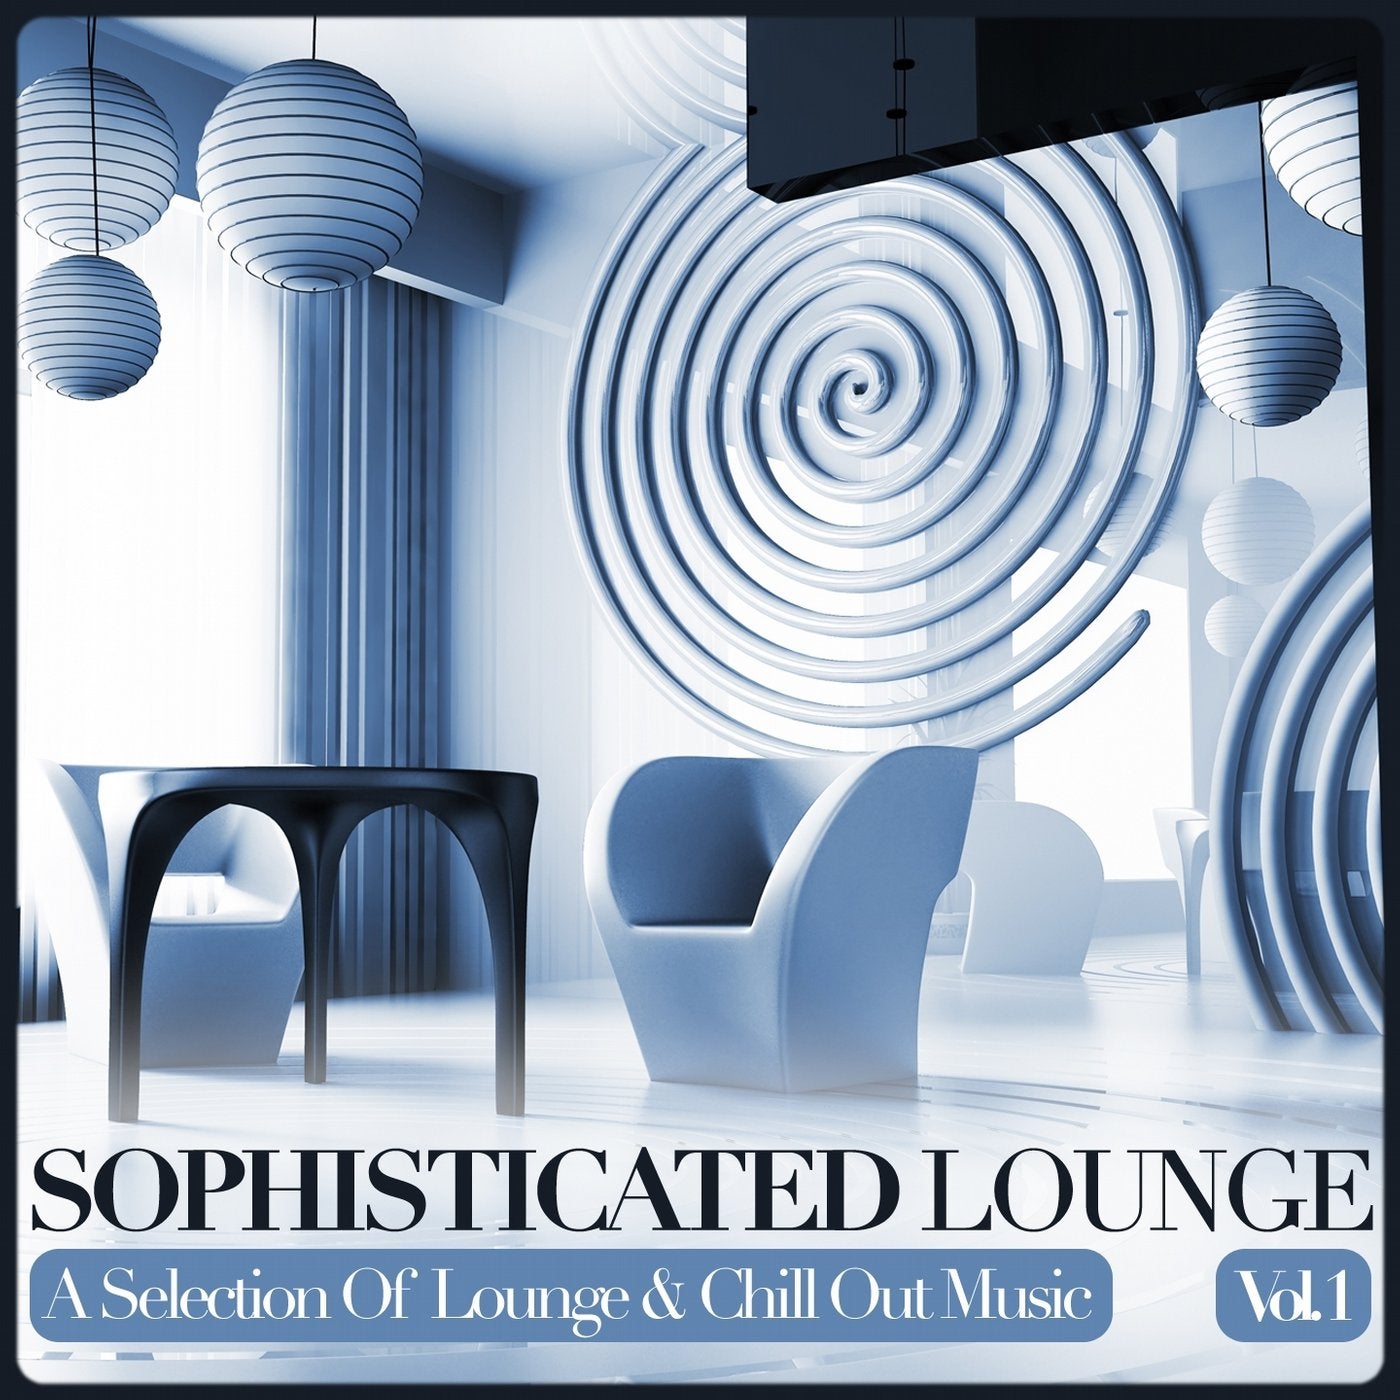 Sophisticated Lounge, Vol. 1 (A Selection Of Lounge & Chill Out Music)